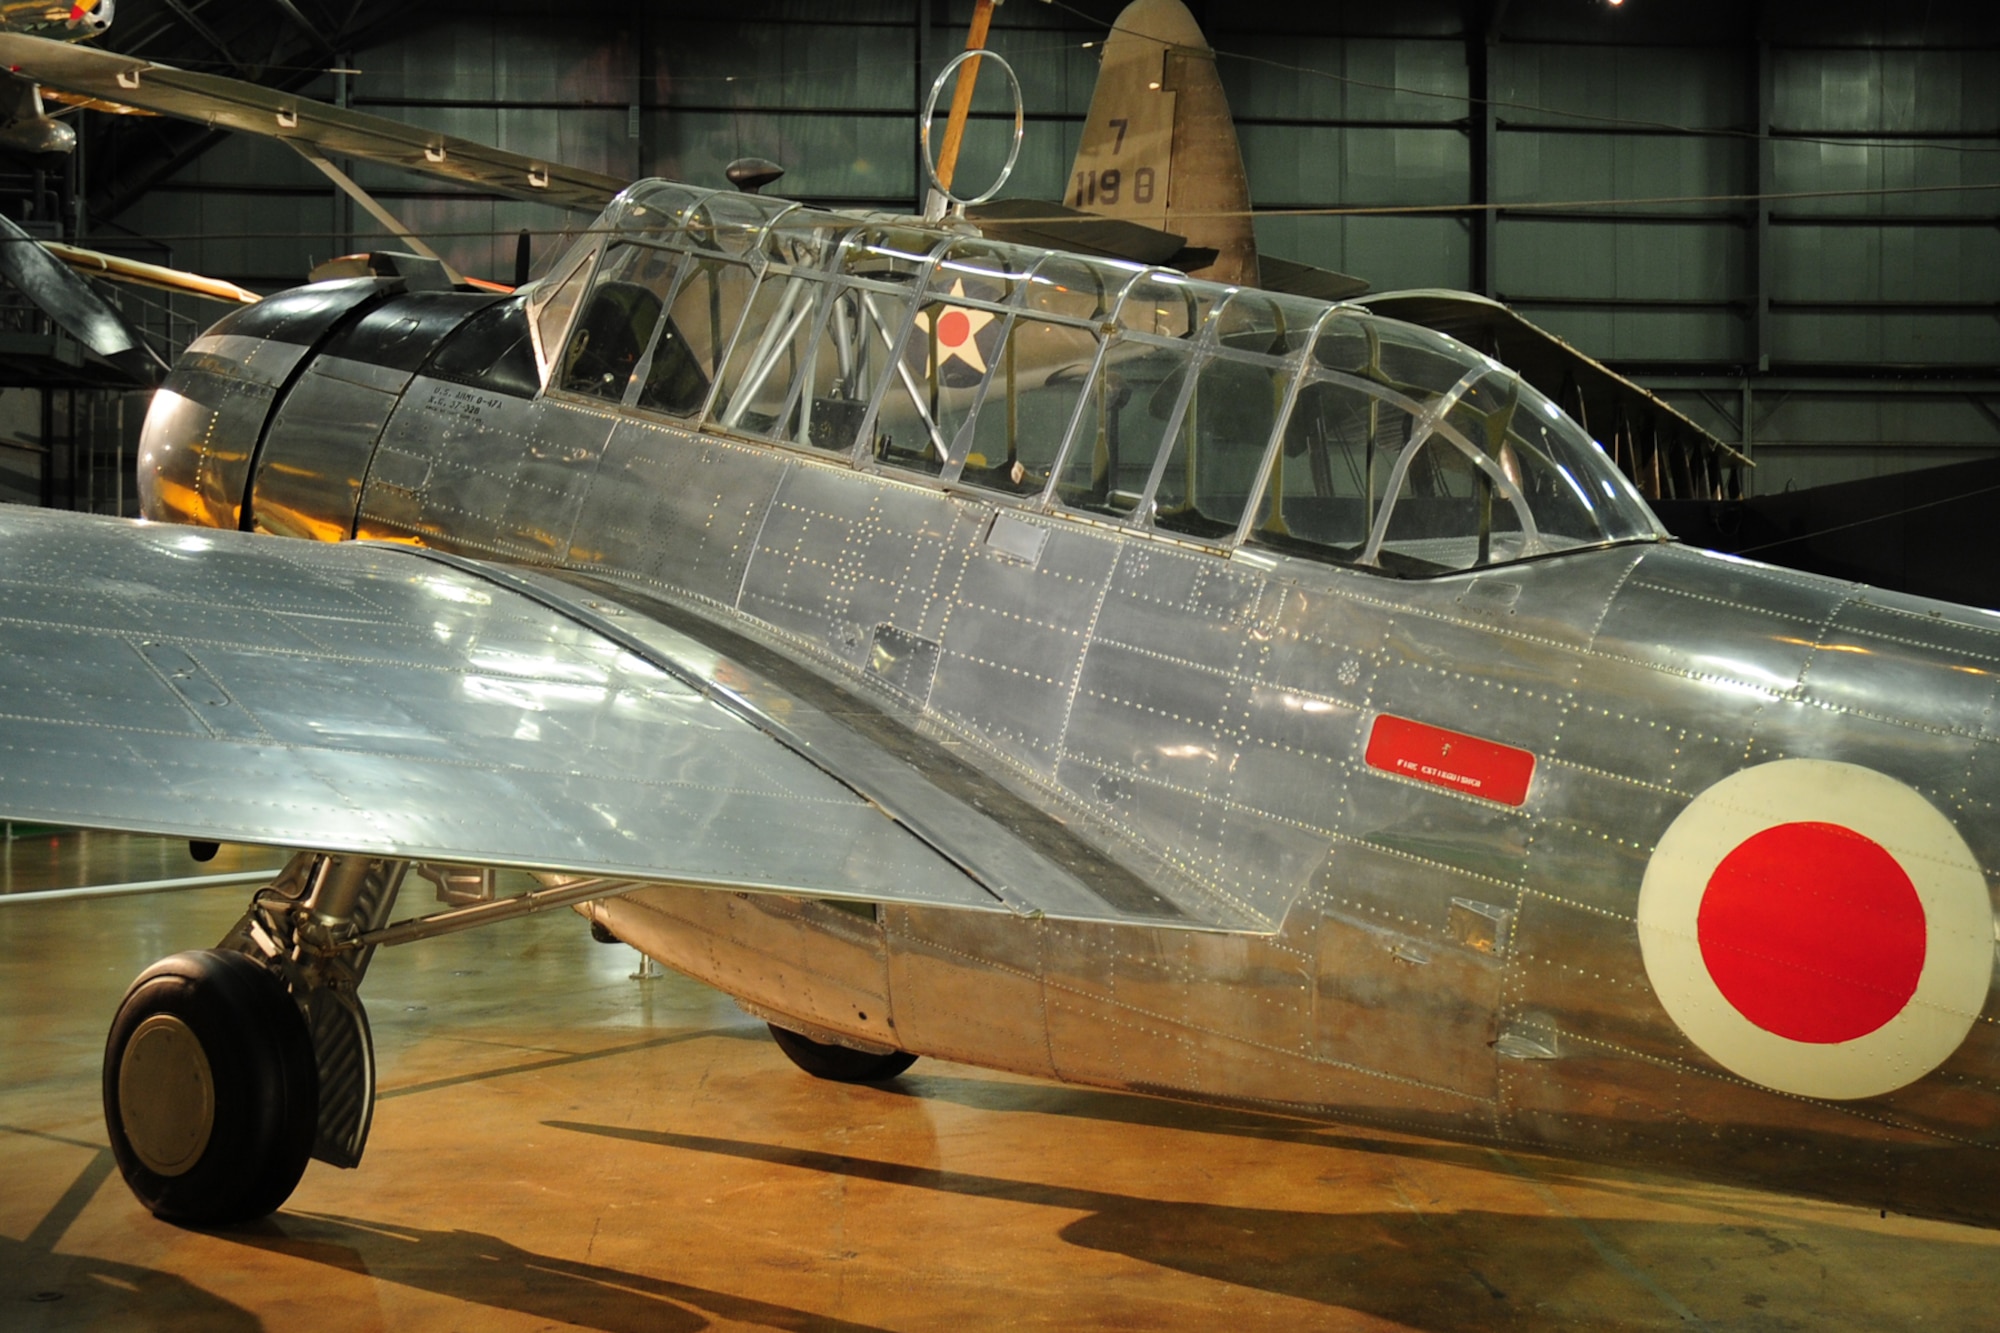 DAYTON, Ohio -- North American O-47B in the Early Years Gallery at the National Museum of the United States Air Force. (U.S. Air Force photo)